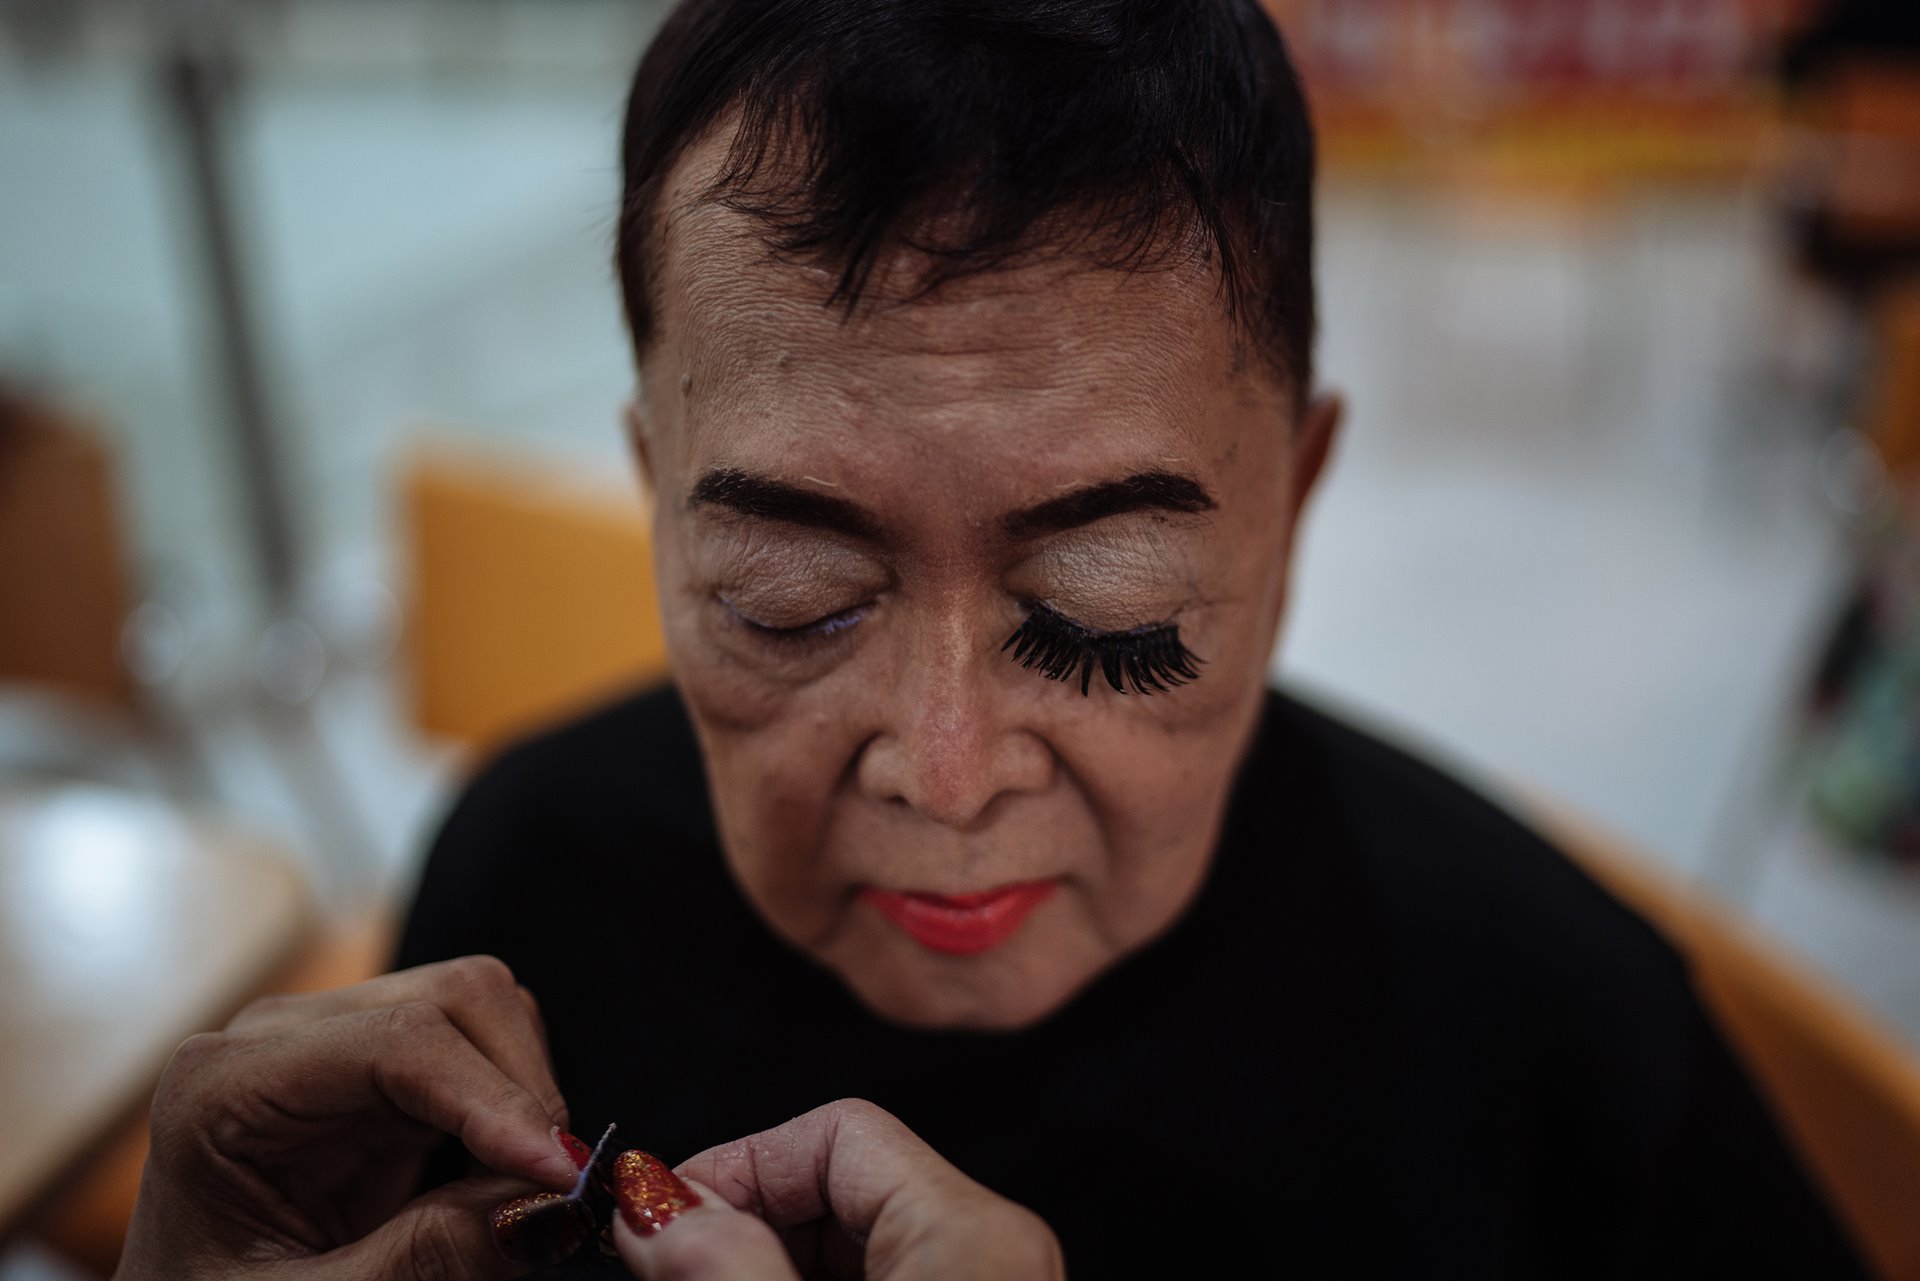 Ramon Busa, or &lsquo;Lola Mon&rsquo; (72), president of the Golden Gays, has her eyelashes applied before a performance in Manila, the Philippines.